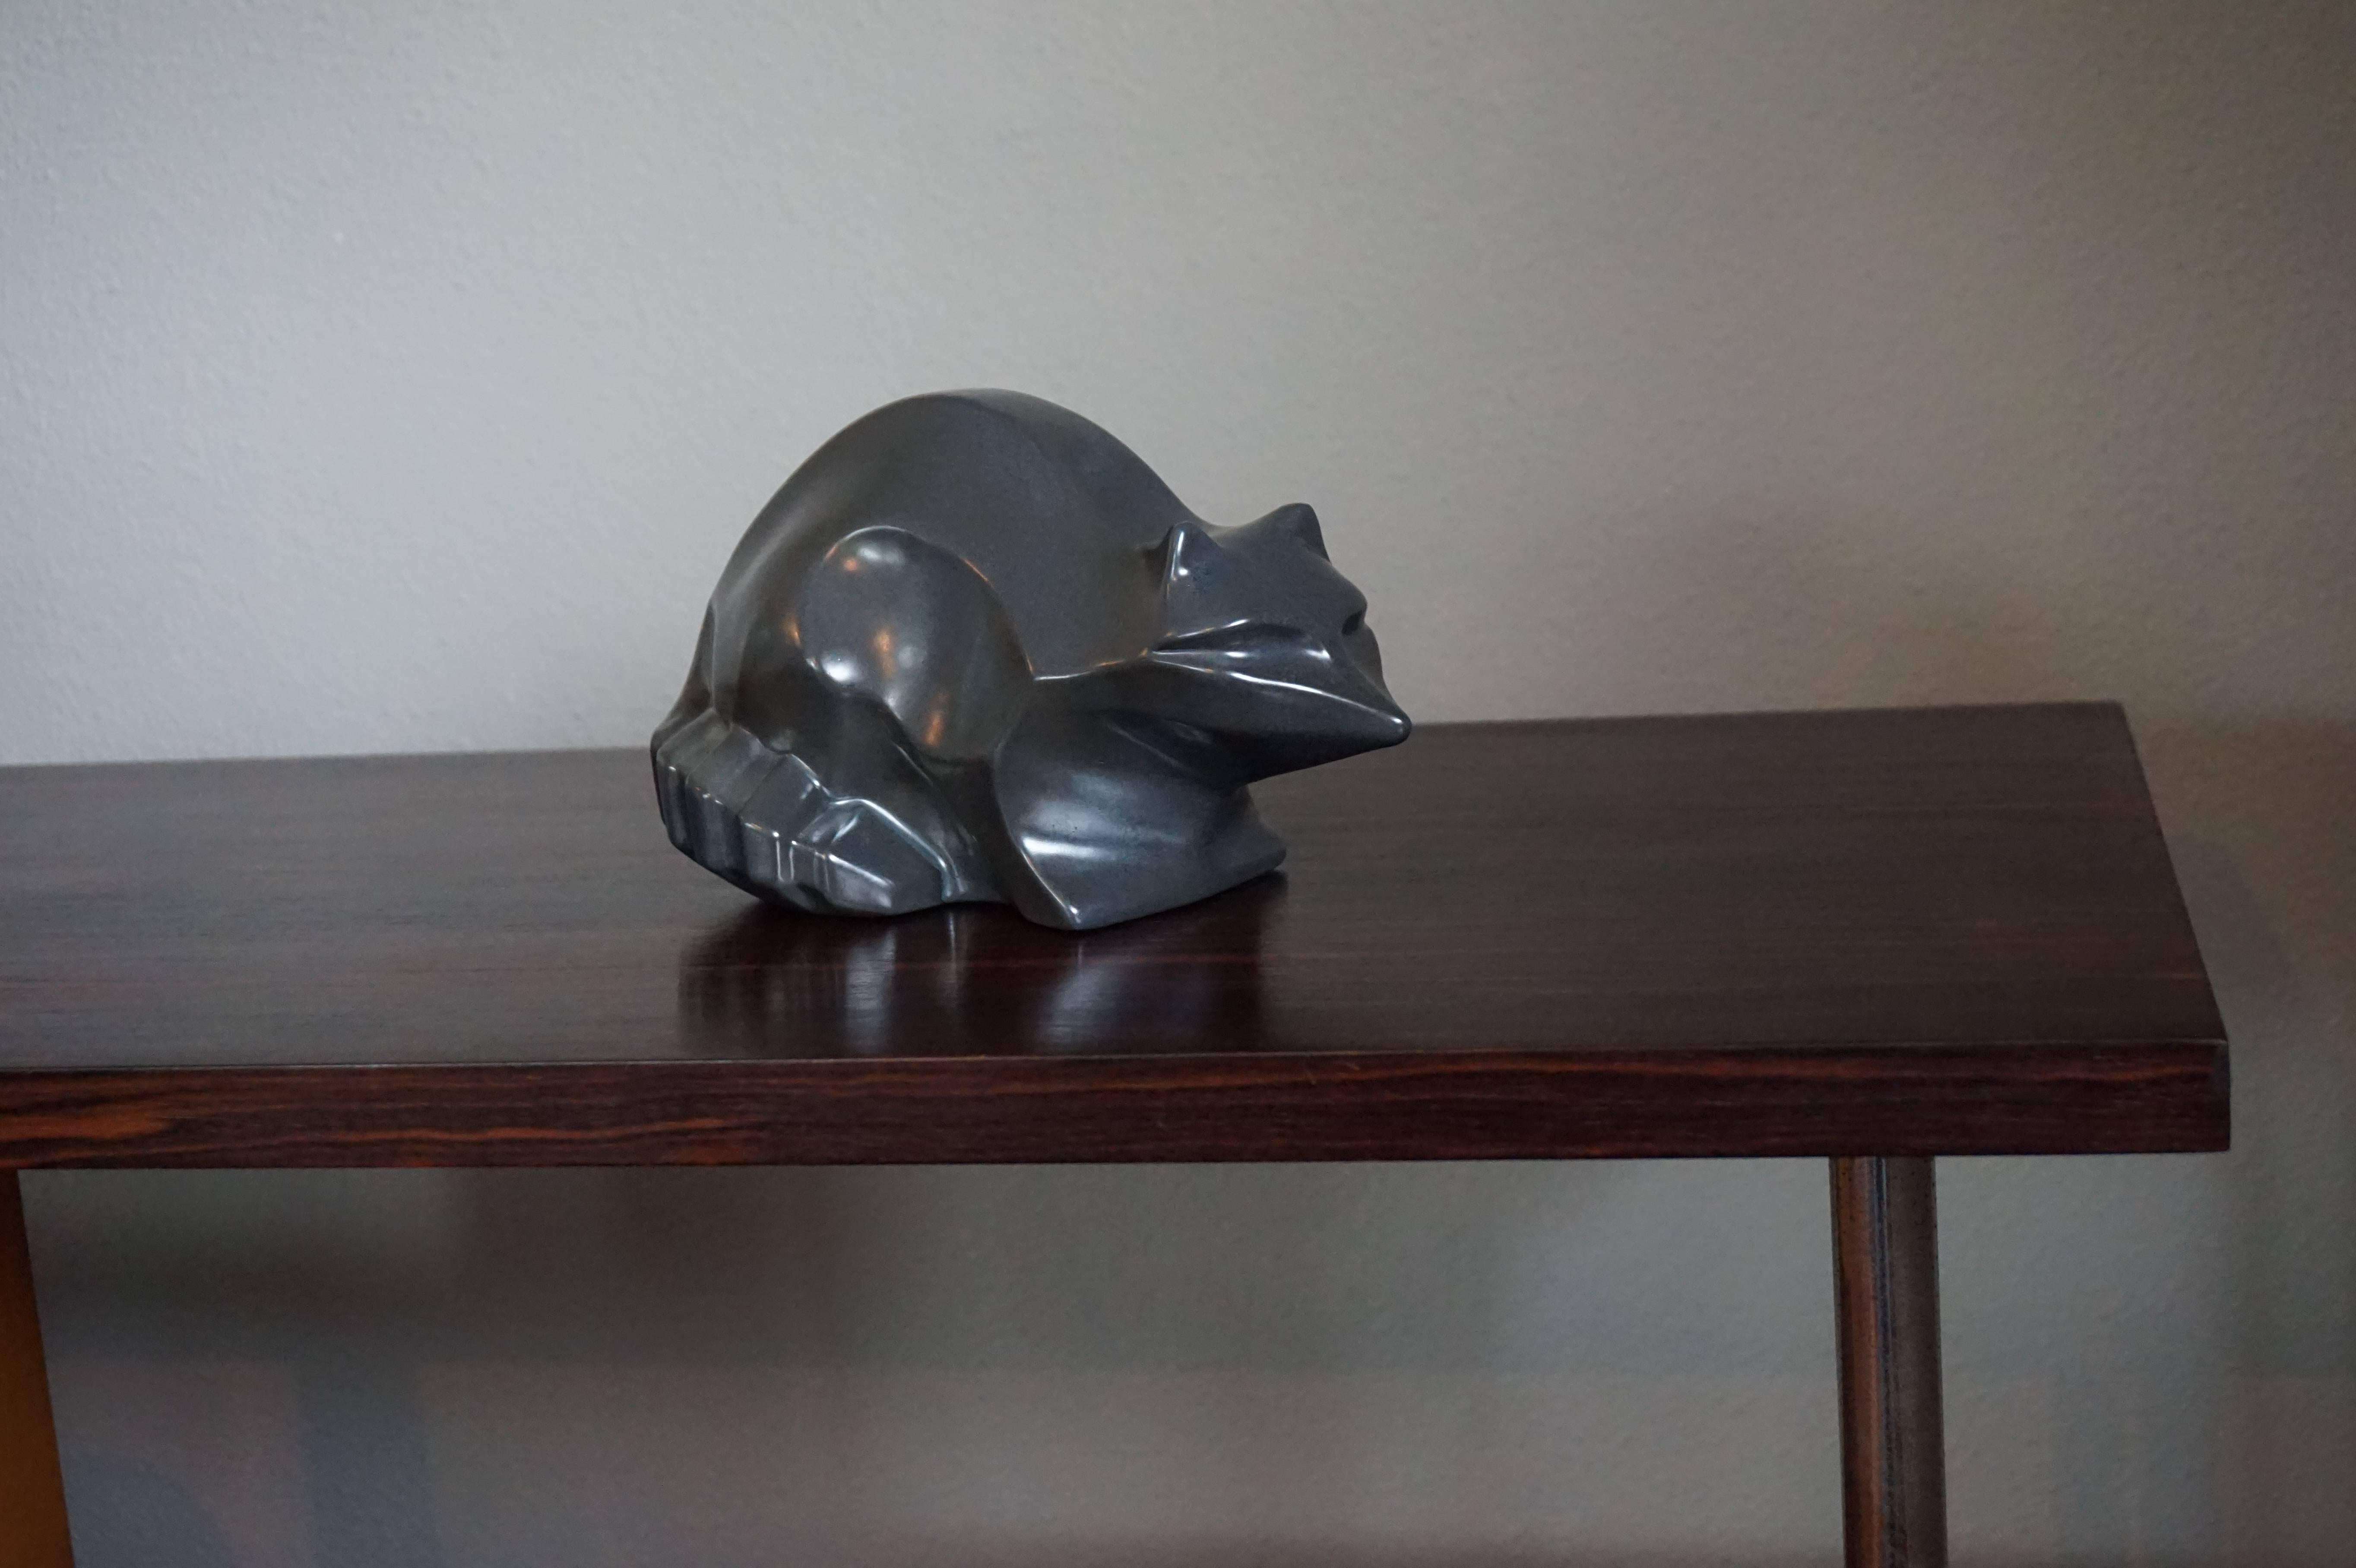 One of a kind, stylized racoon sculpture.

We have had this beautifully stylized racoon for a number of years now, but we never had it up for sale. We have tried to find out more about it, but this racoon is a bit of an enigma. We don't know who